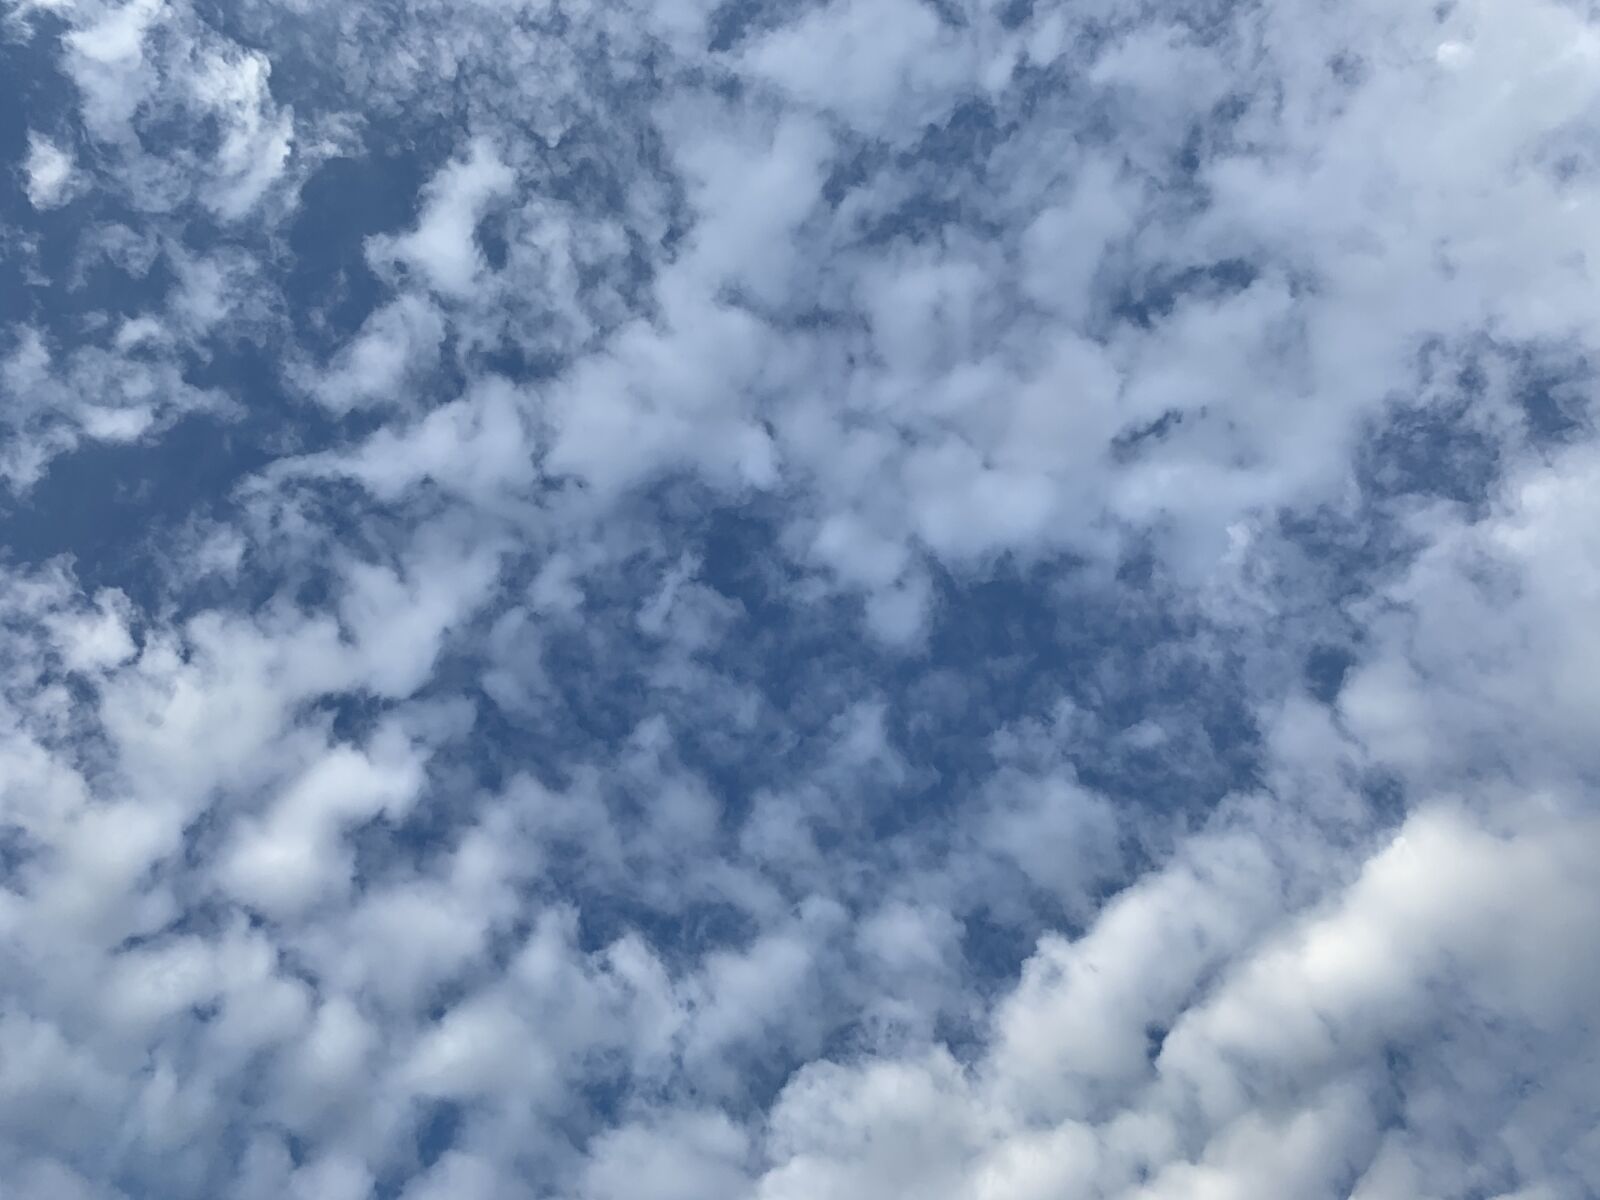 Apple iPhone XS Max sample photo. Cloud, cloudy, sky photography